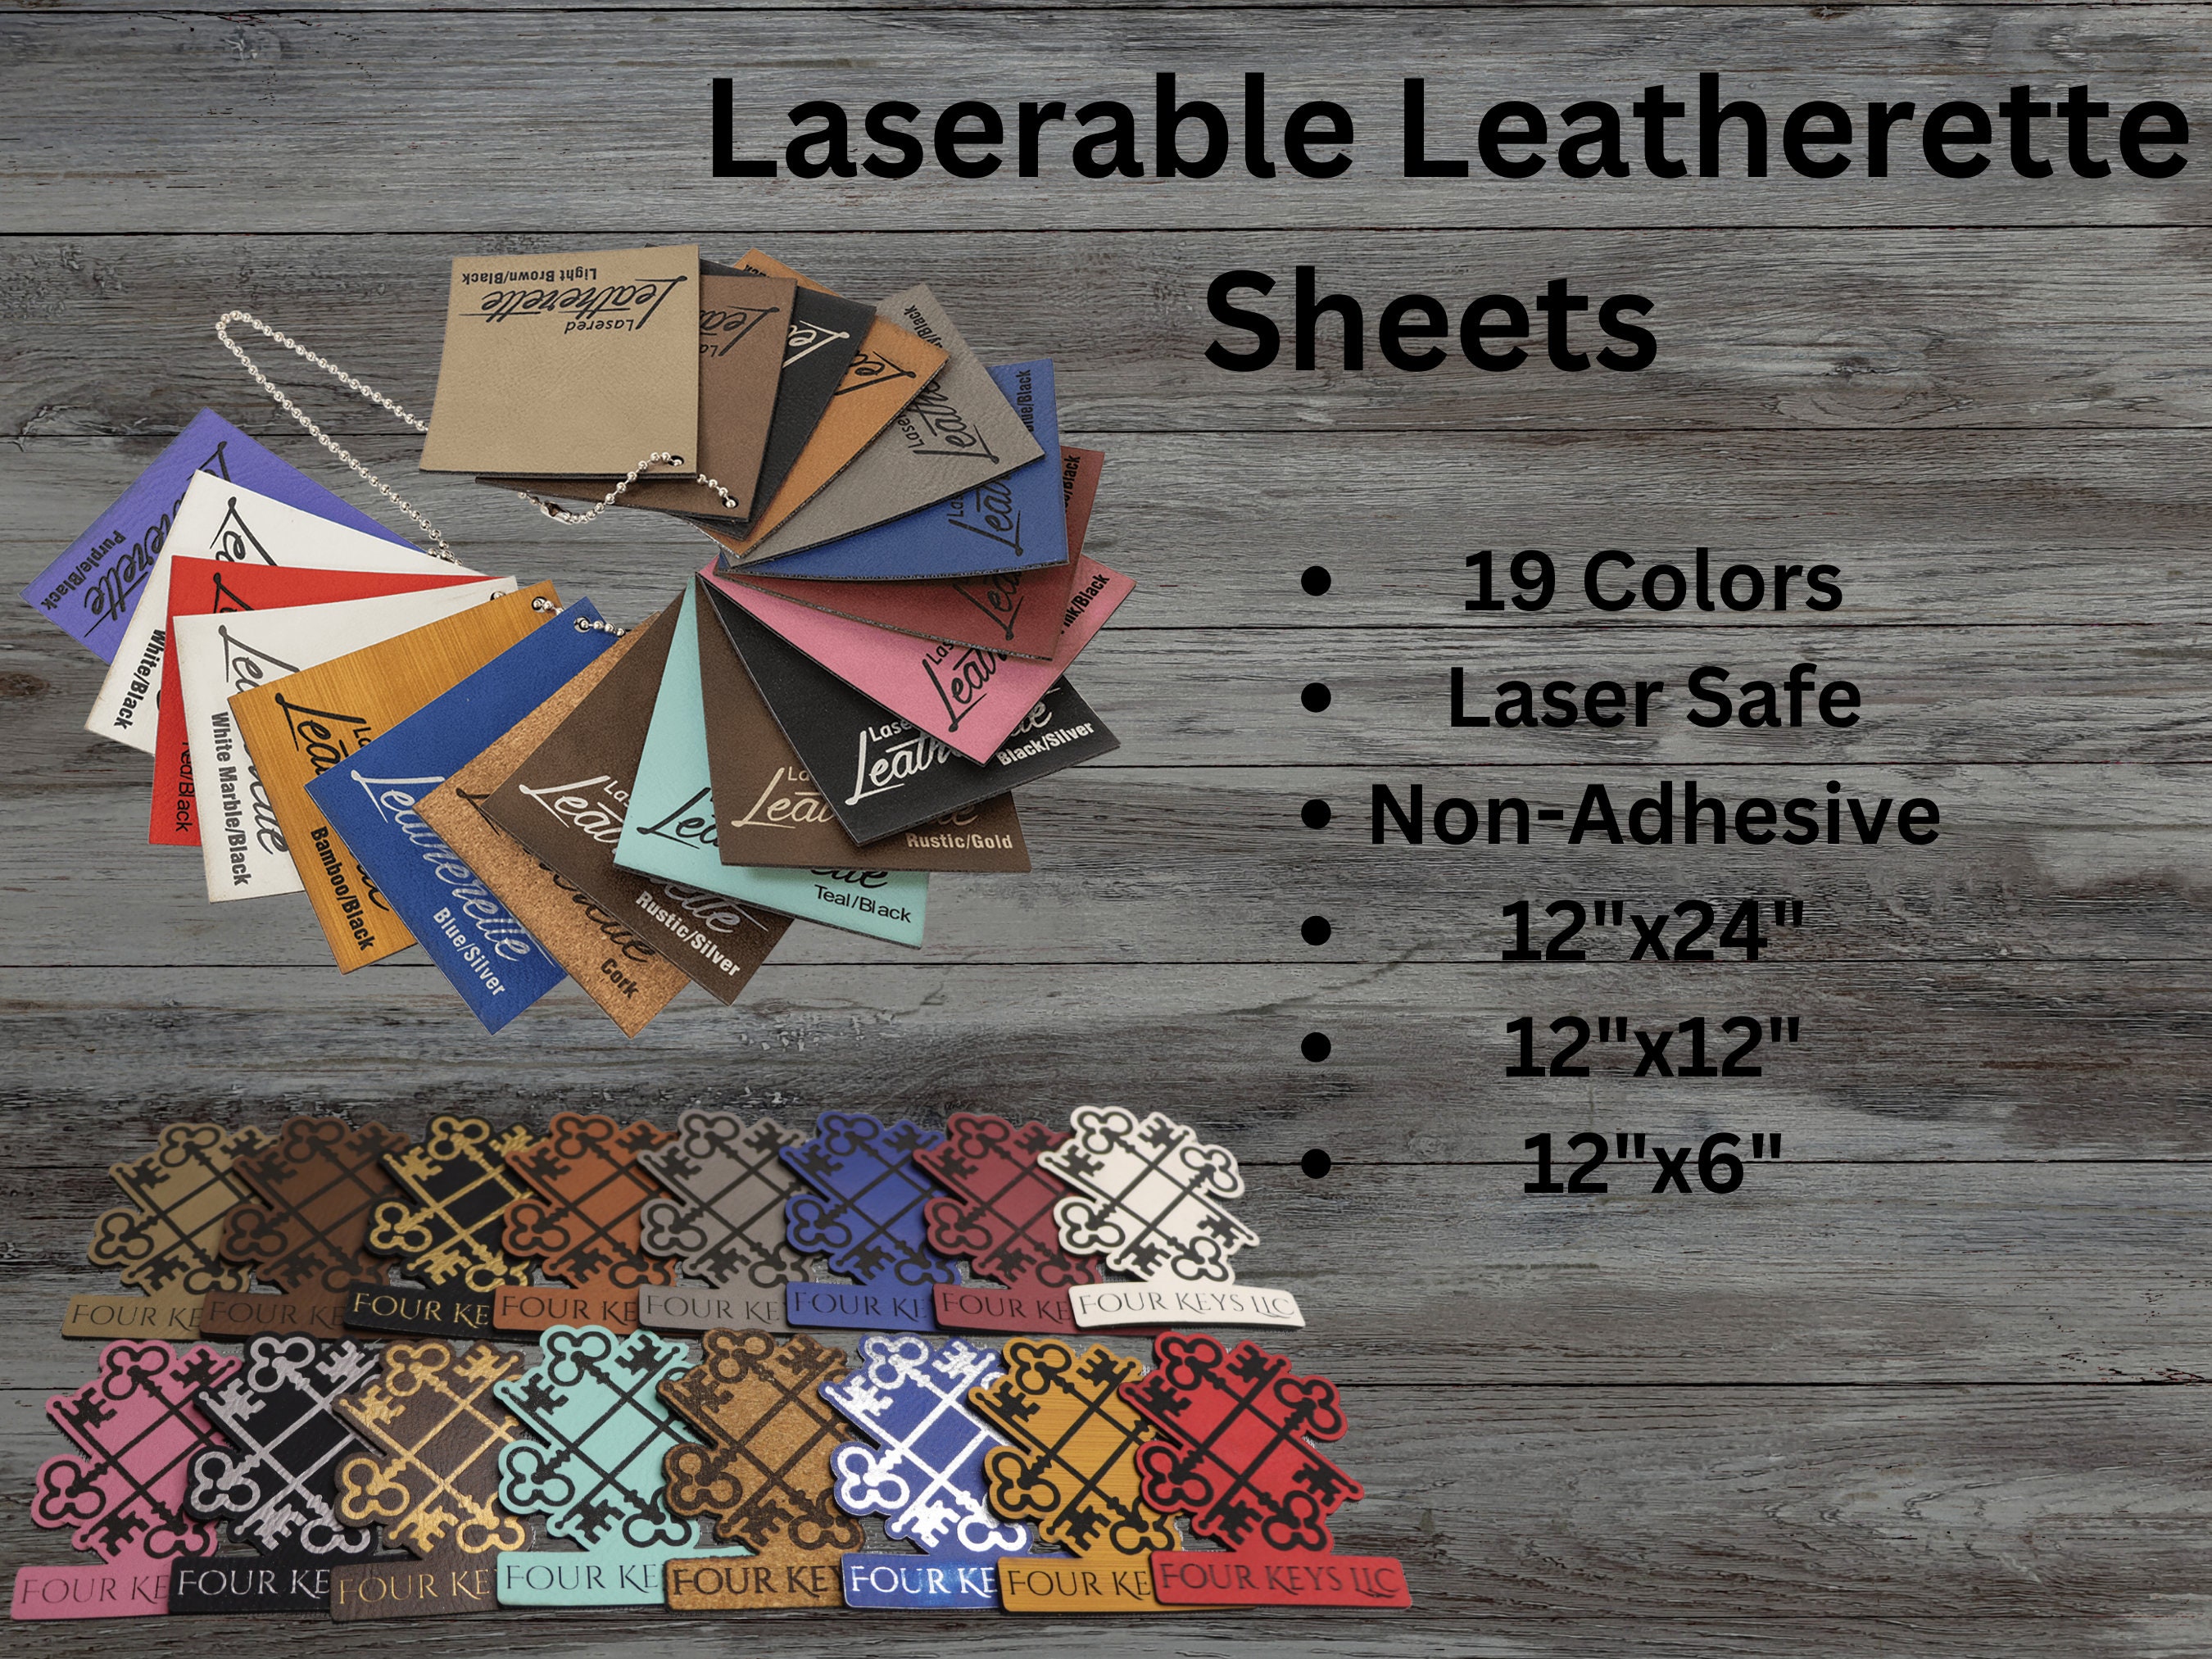 12 x 24 Laserable Leather Sheets with Heat Transfer Adhesive Backing, CO2 Laser Engraving Supplies, for Glowforge Supplie (Blue/Silver, 2)